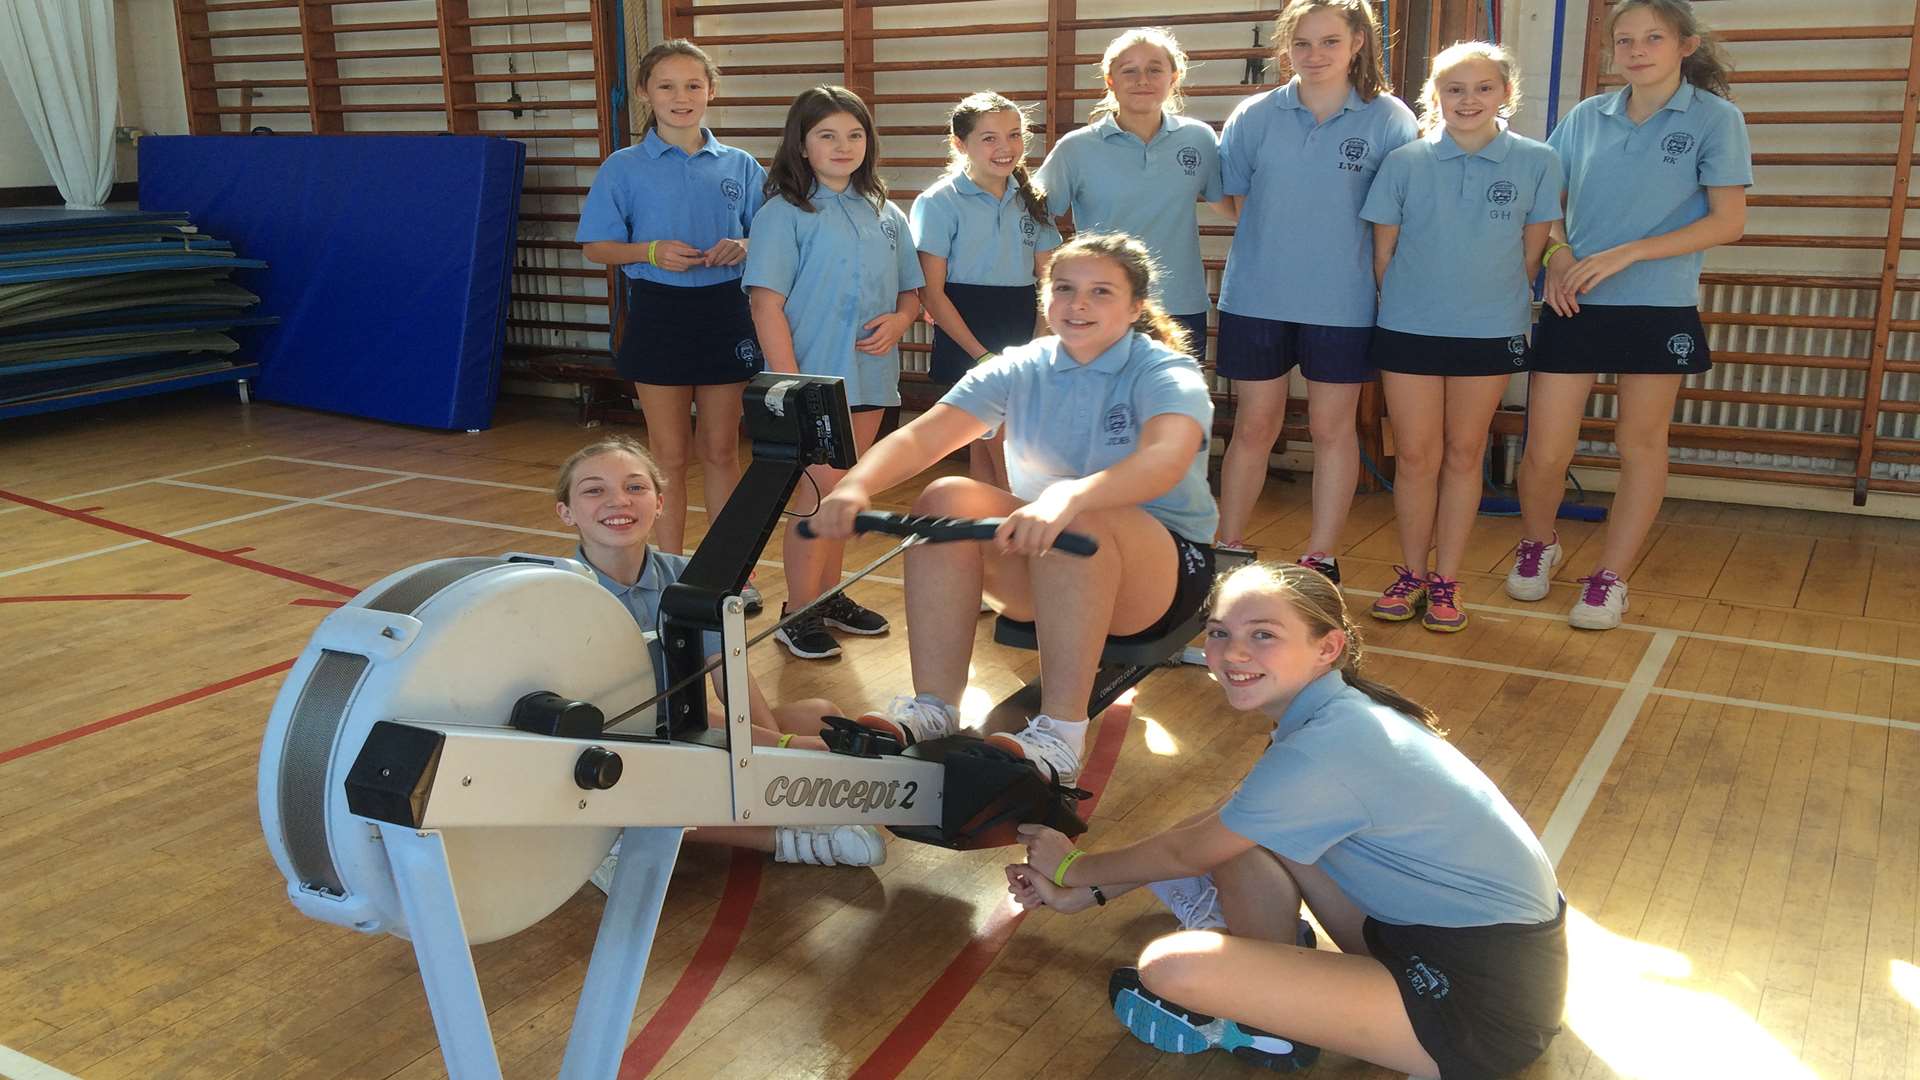 MGGS pupils taking up the challenge: (standing) Charlotte Withers, Freya Eales, Anna Sheldrake, Madeline Hall, Lian Mills, Gracie Hammond, Rachael Kemsley. Front row Madison Copping, Emma Weal (on the rowing machine), and Connie Lamplugh.